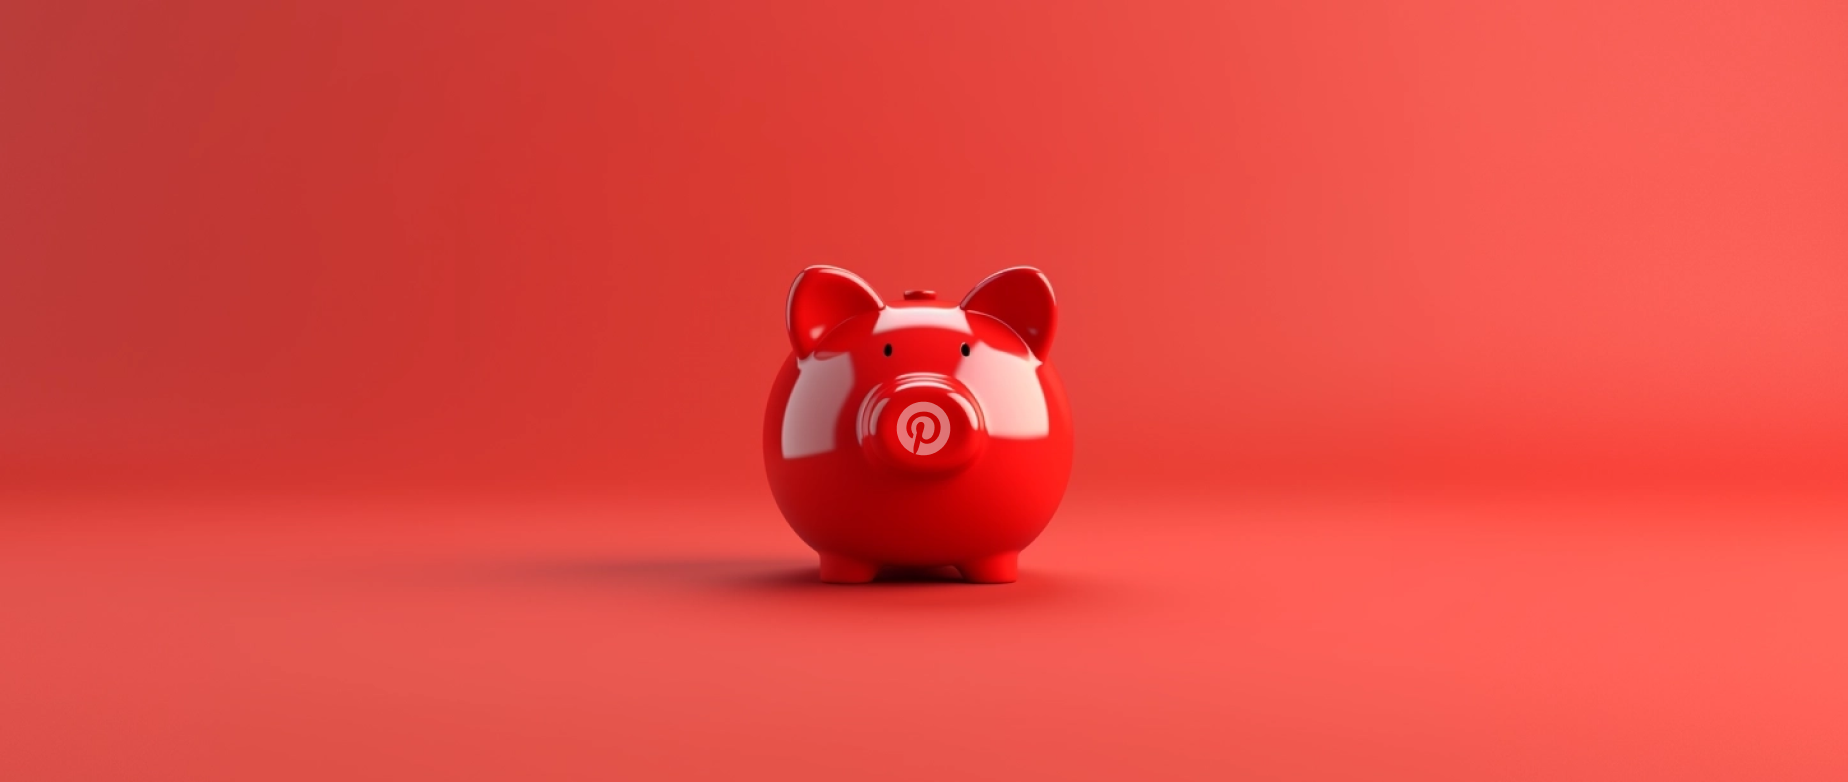 A shiny red piggy bank on a red background.